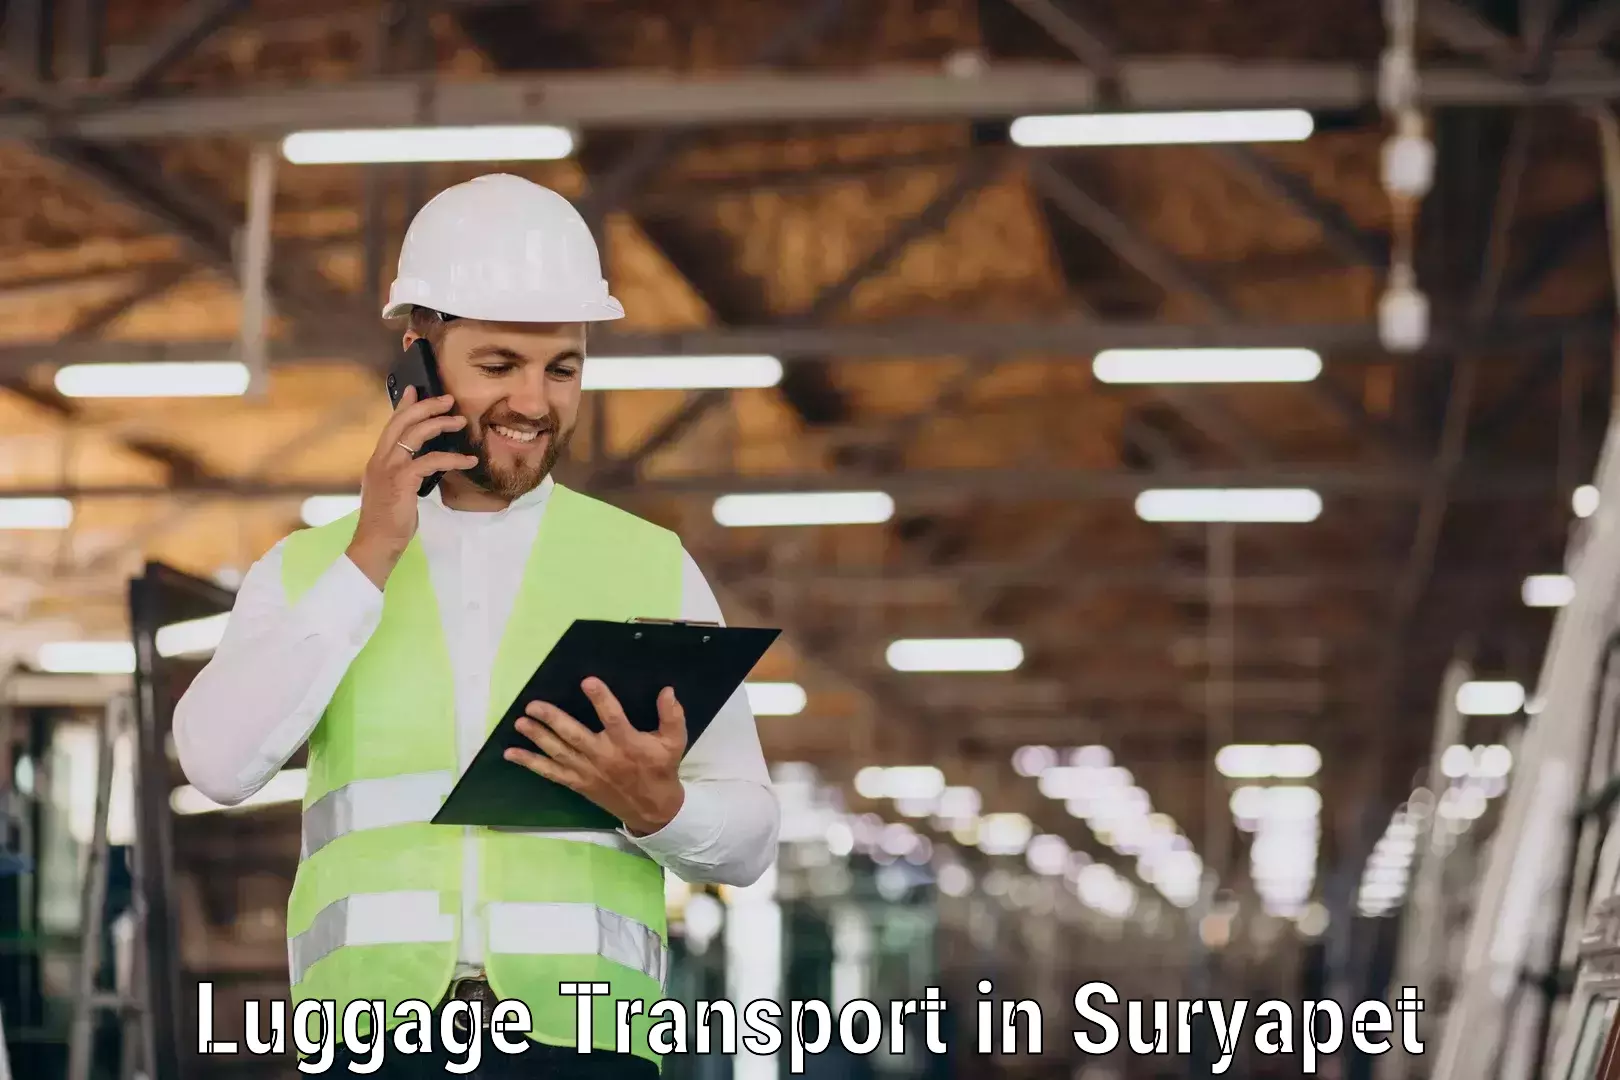 Excess baggage transport in Suryapet